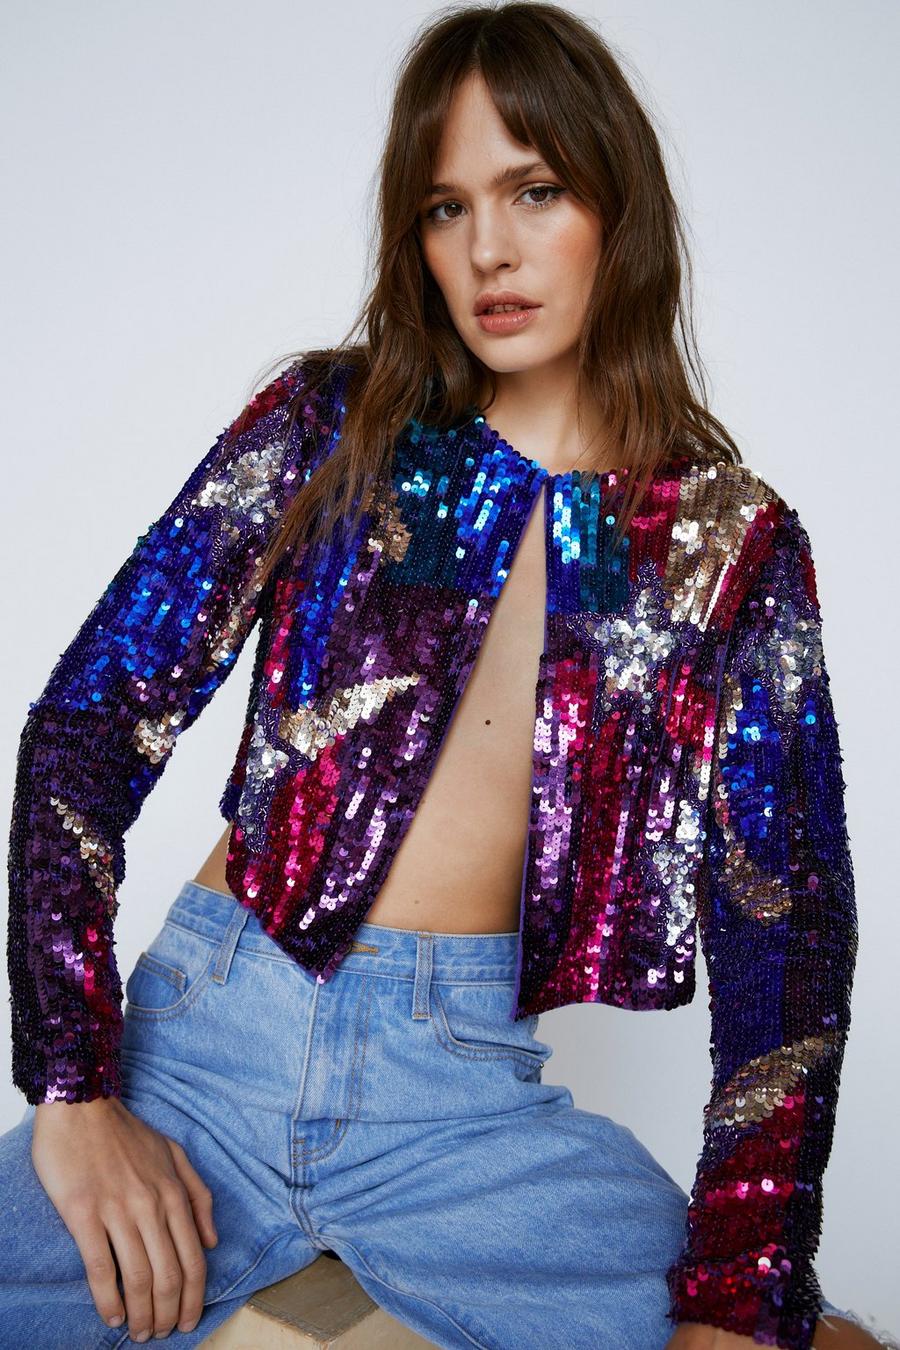 Blue Sequin Star And Heart Jacket